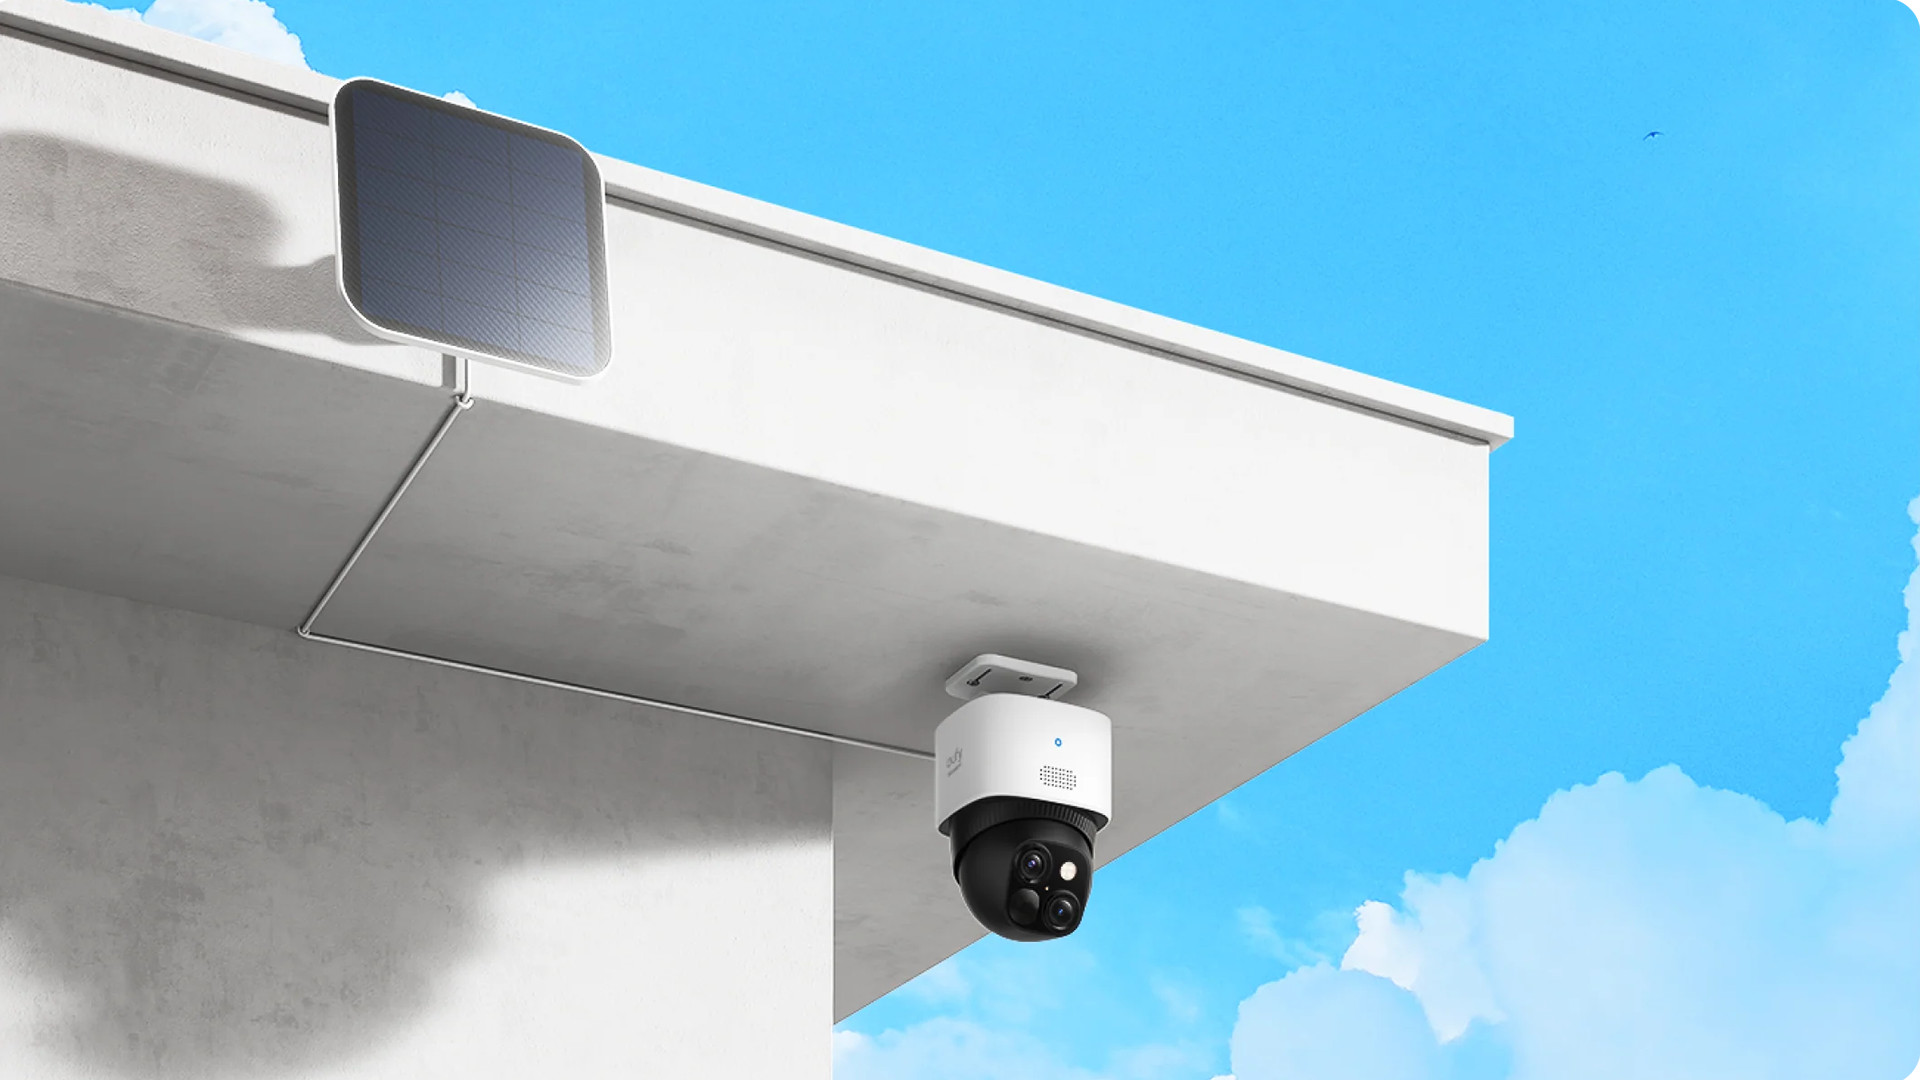 Eufy's all-seeing smart home cams can shoot your videos from